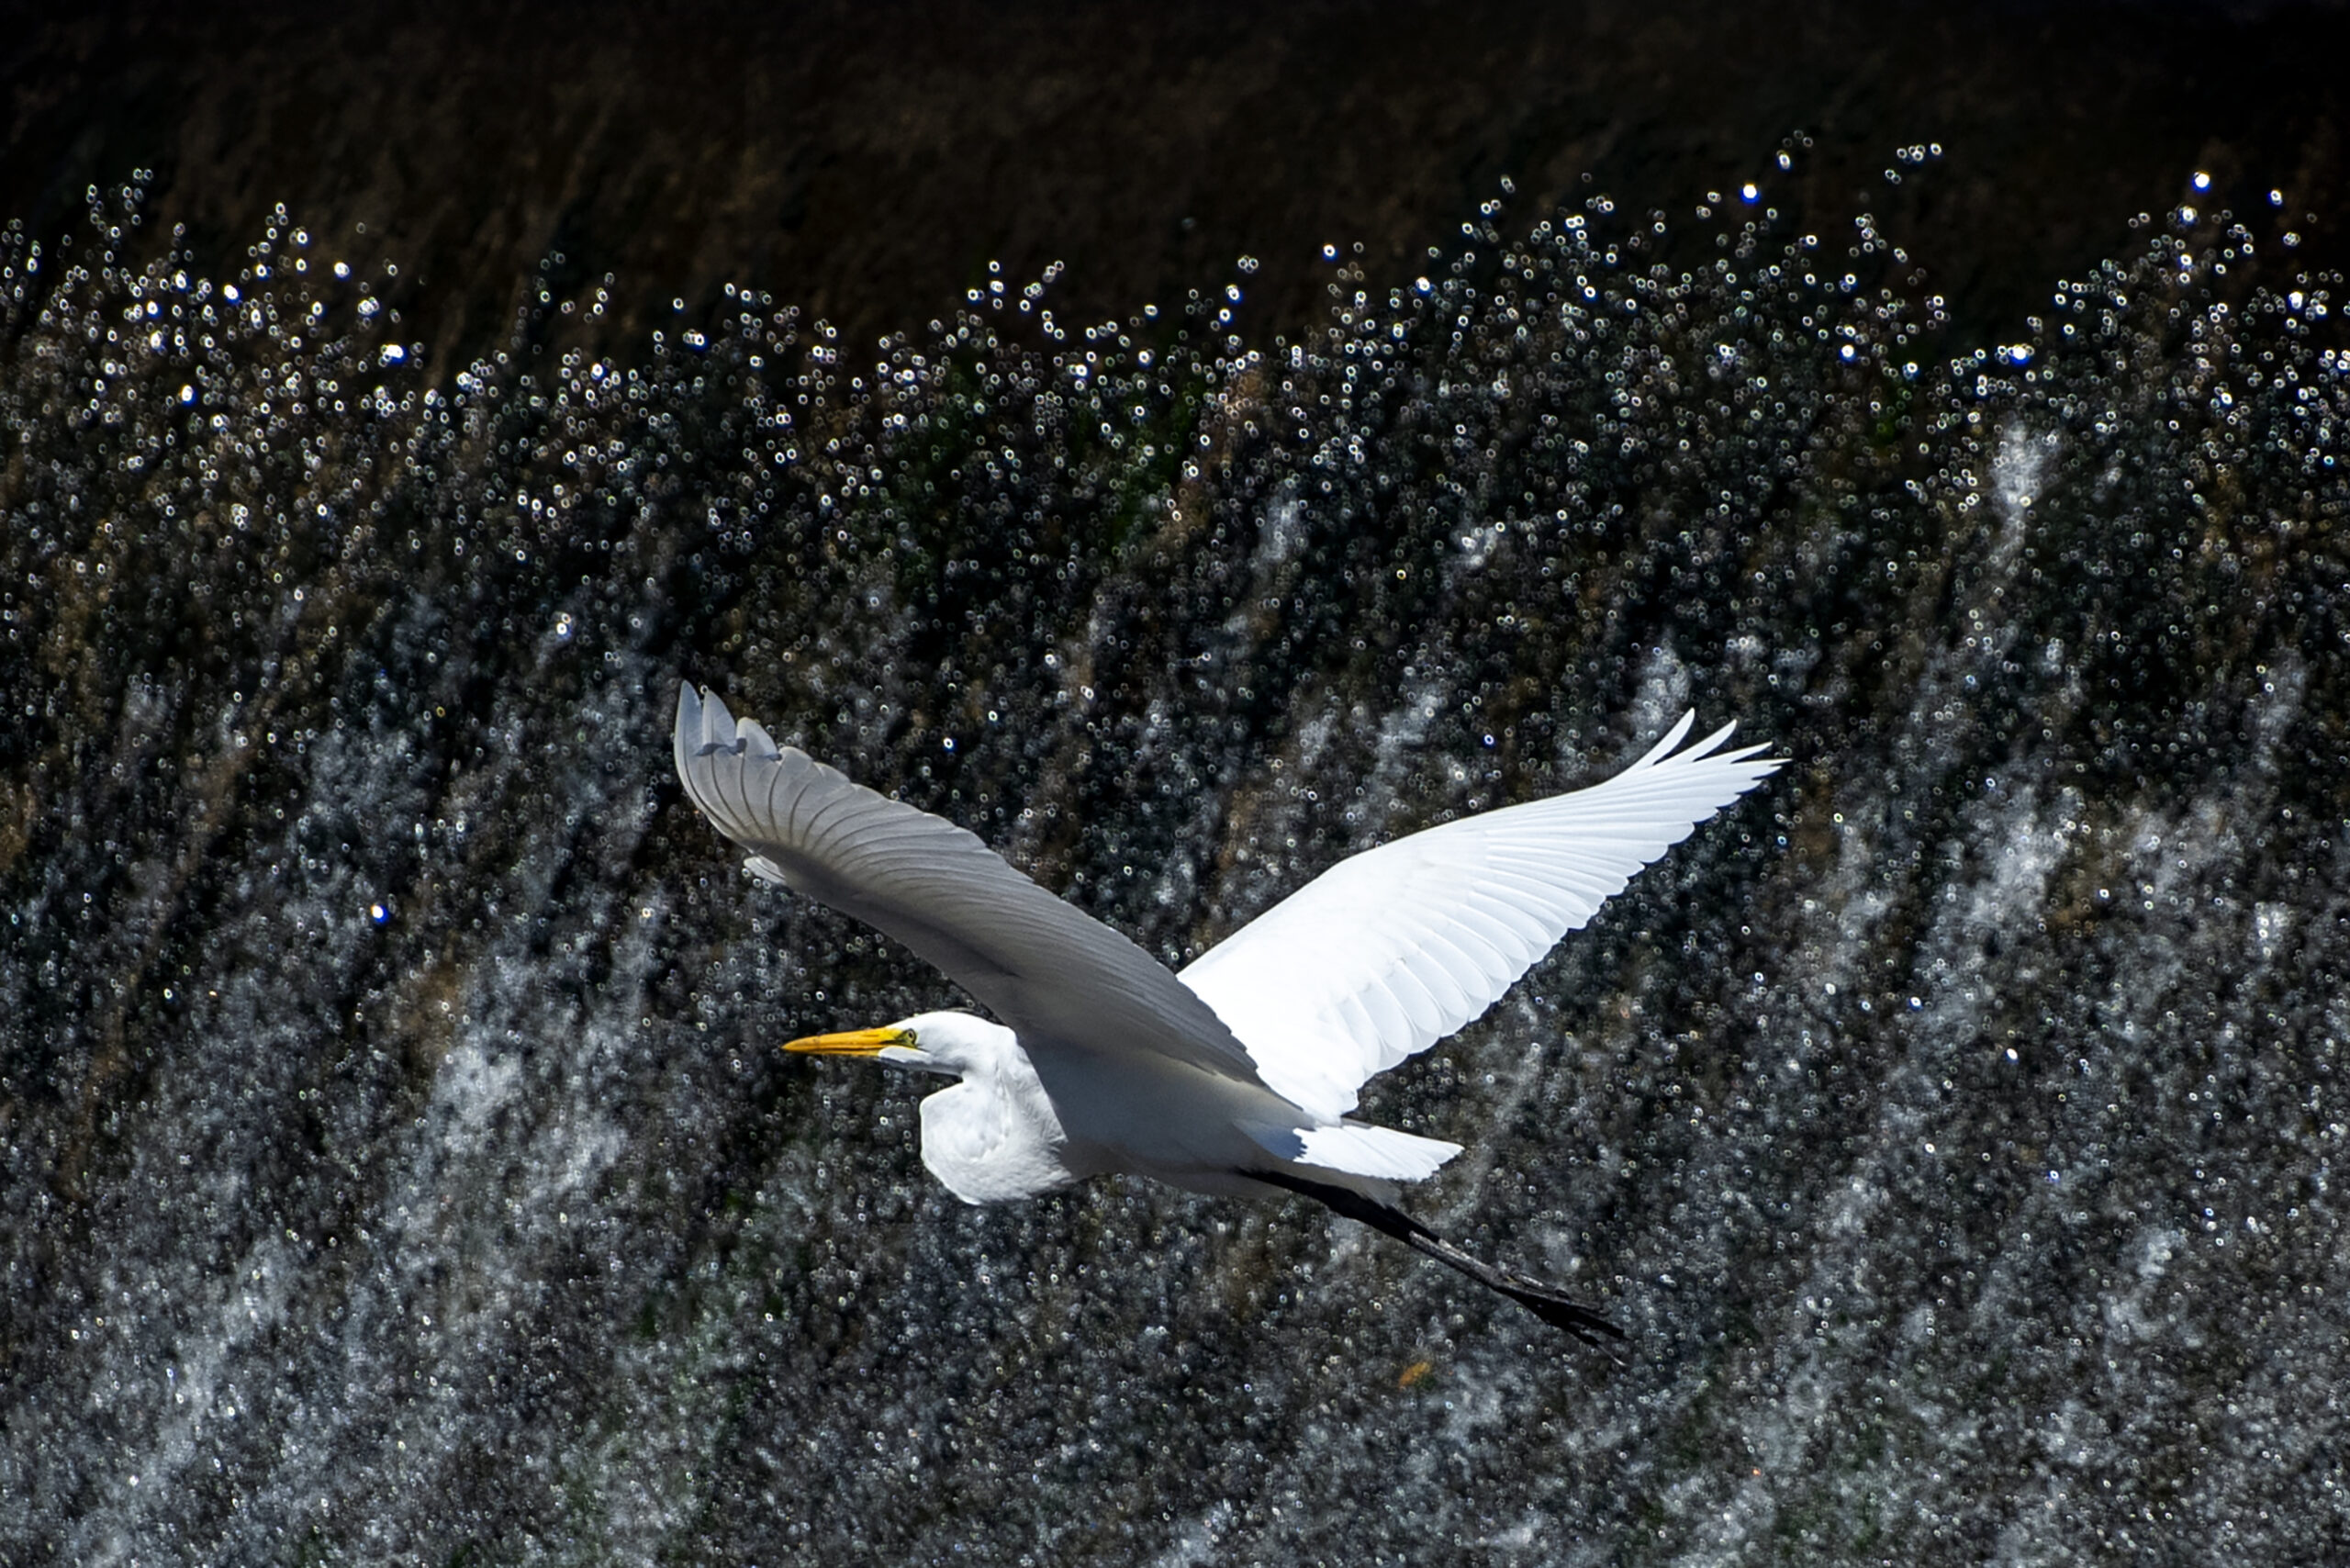 A white bird spreads its wings wide as it glides in front of falling water.